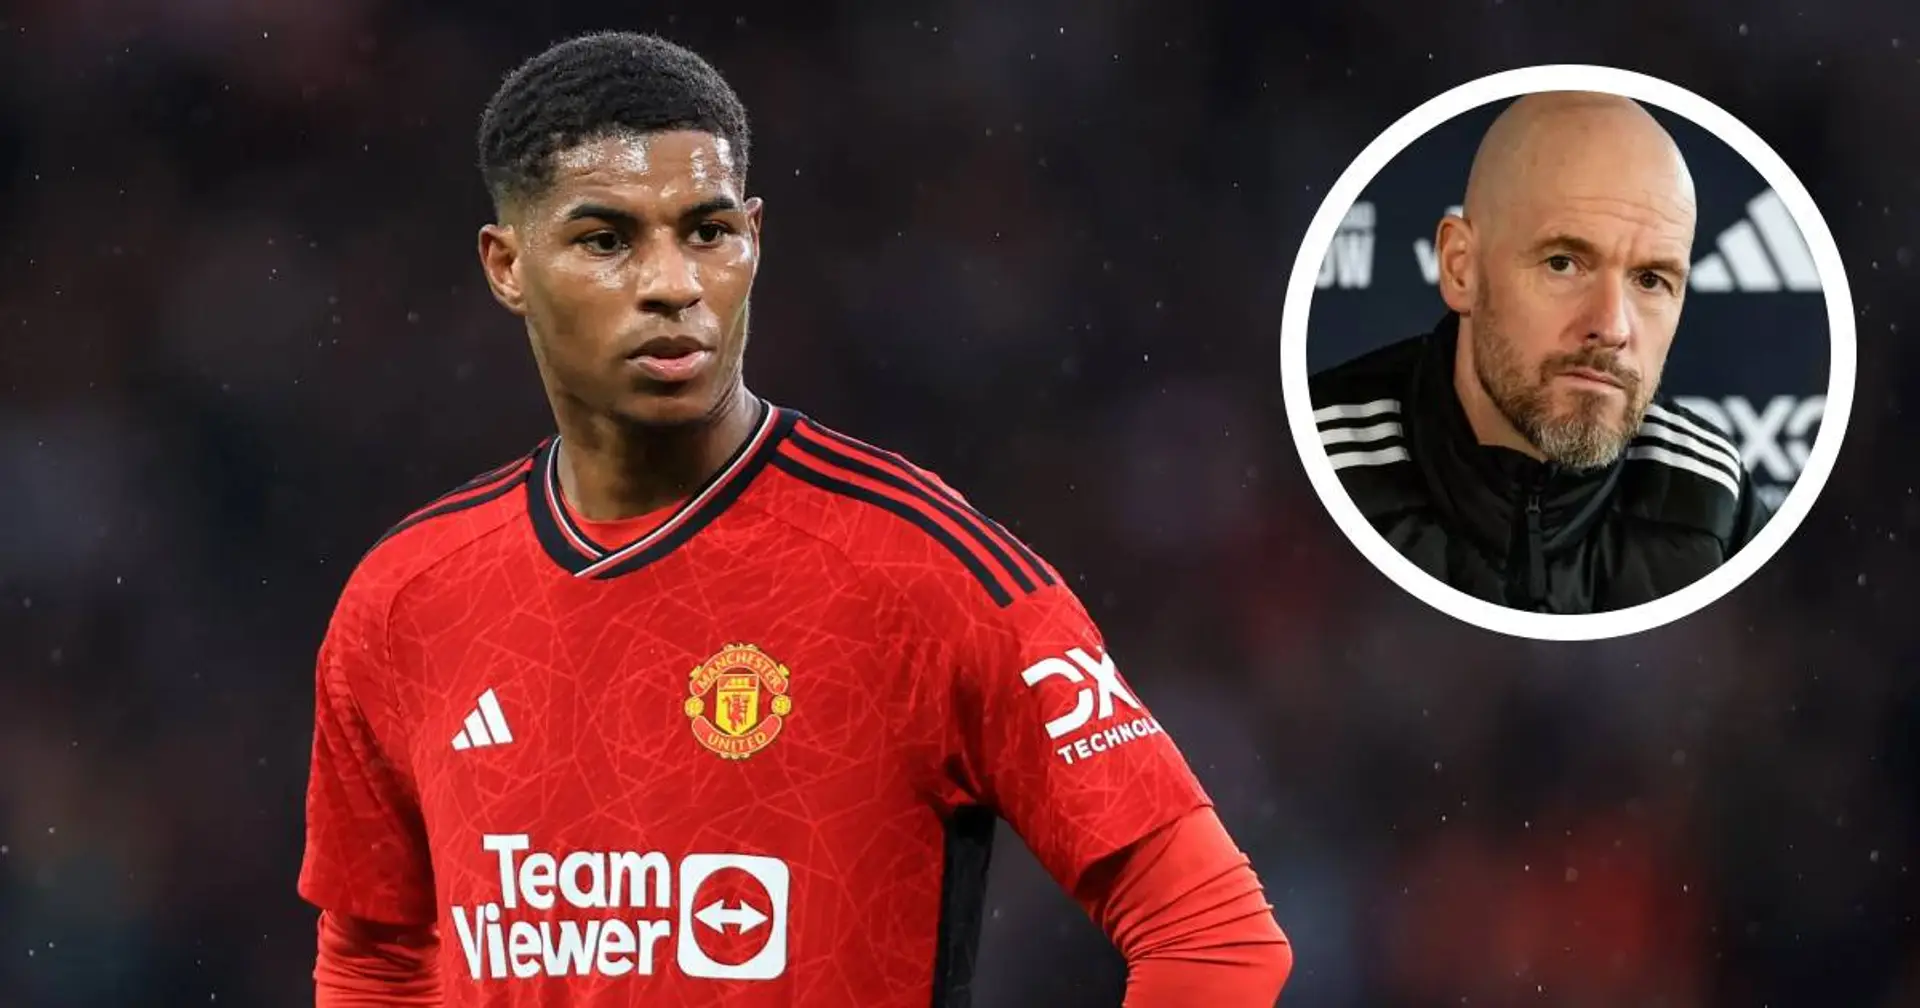 'He scored 3 goals in 3 games': Ten Hag leaps to Rashford's defence after dismal Chelsea outing